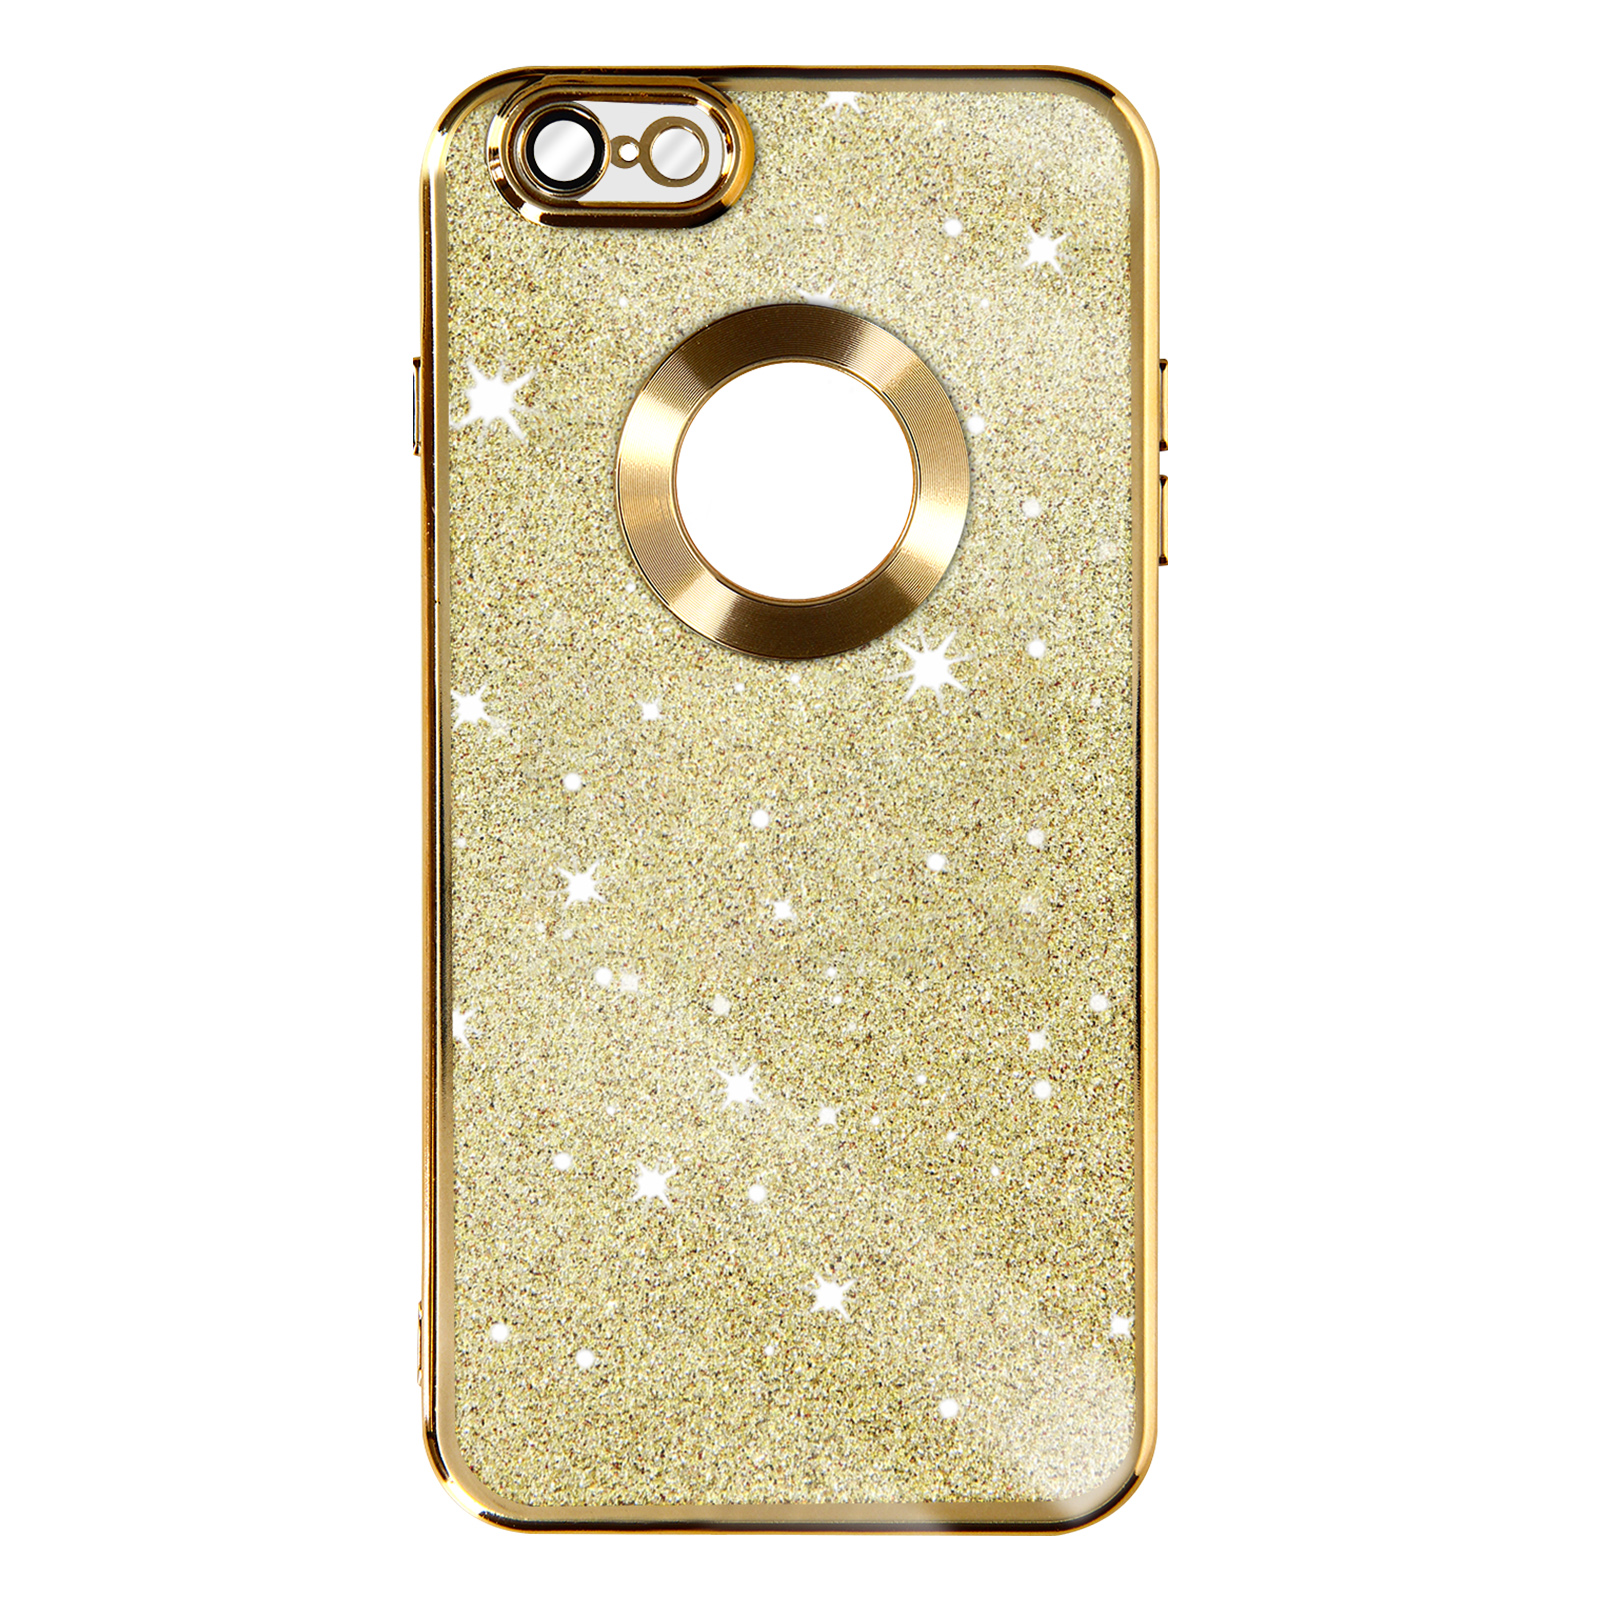 AVIZAR iPhone Gold Spark Plus, 6S Apple, Series, Protecam Backcover,